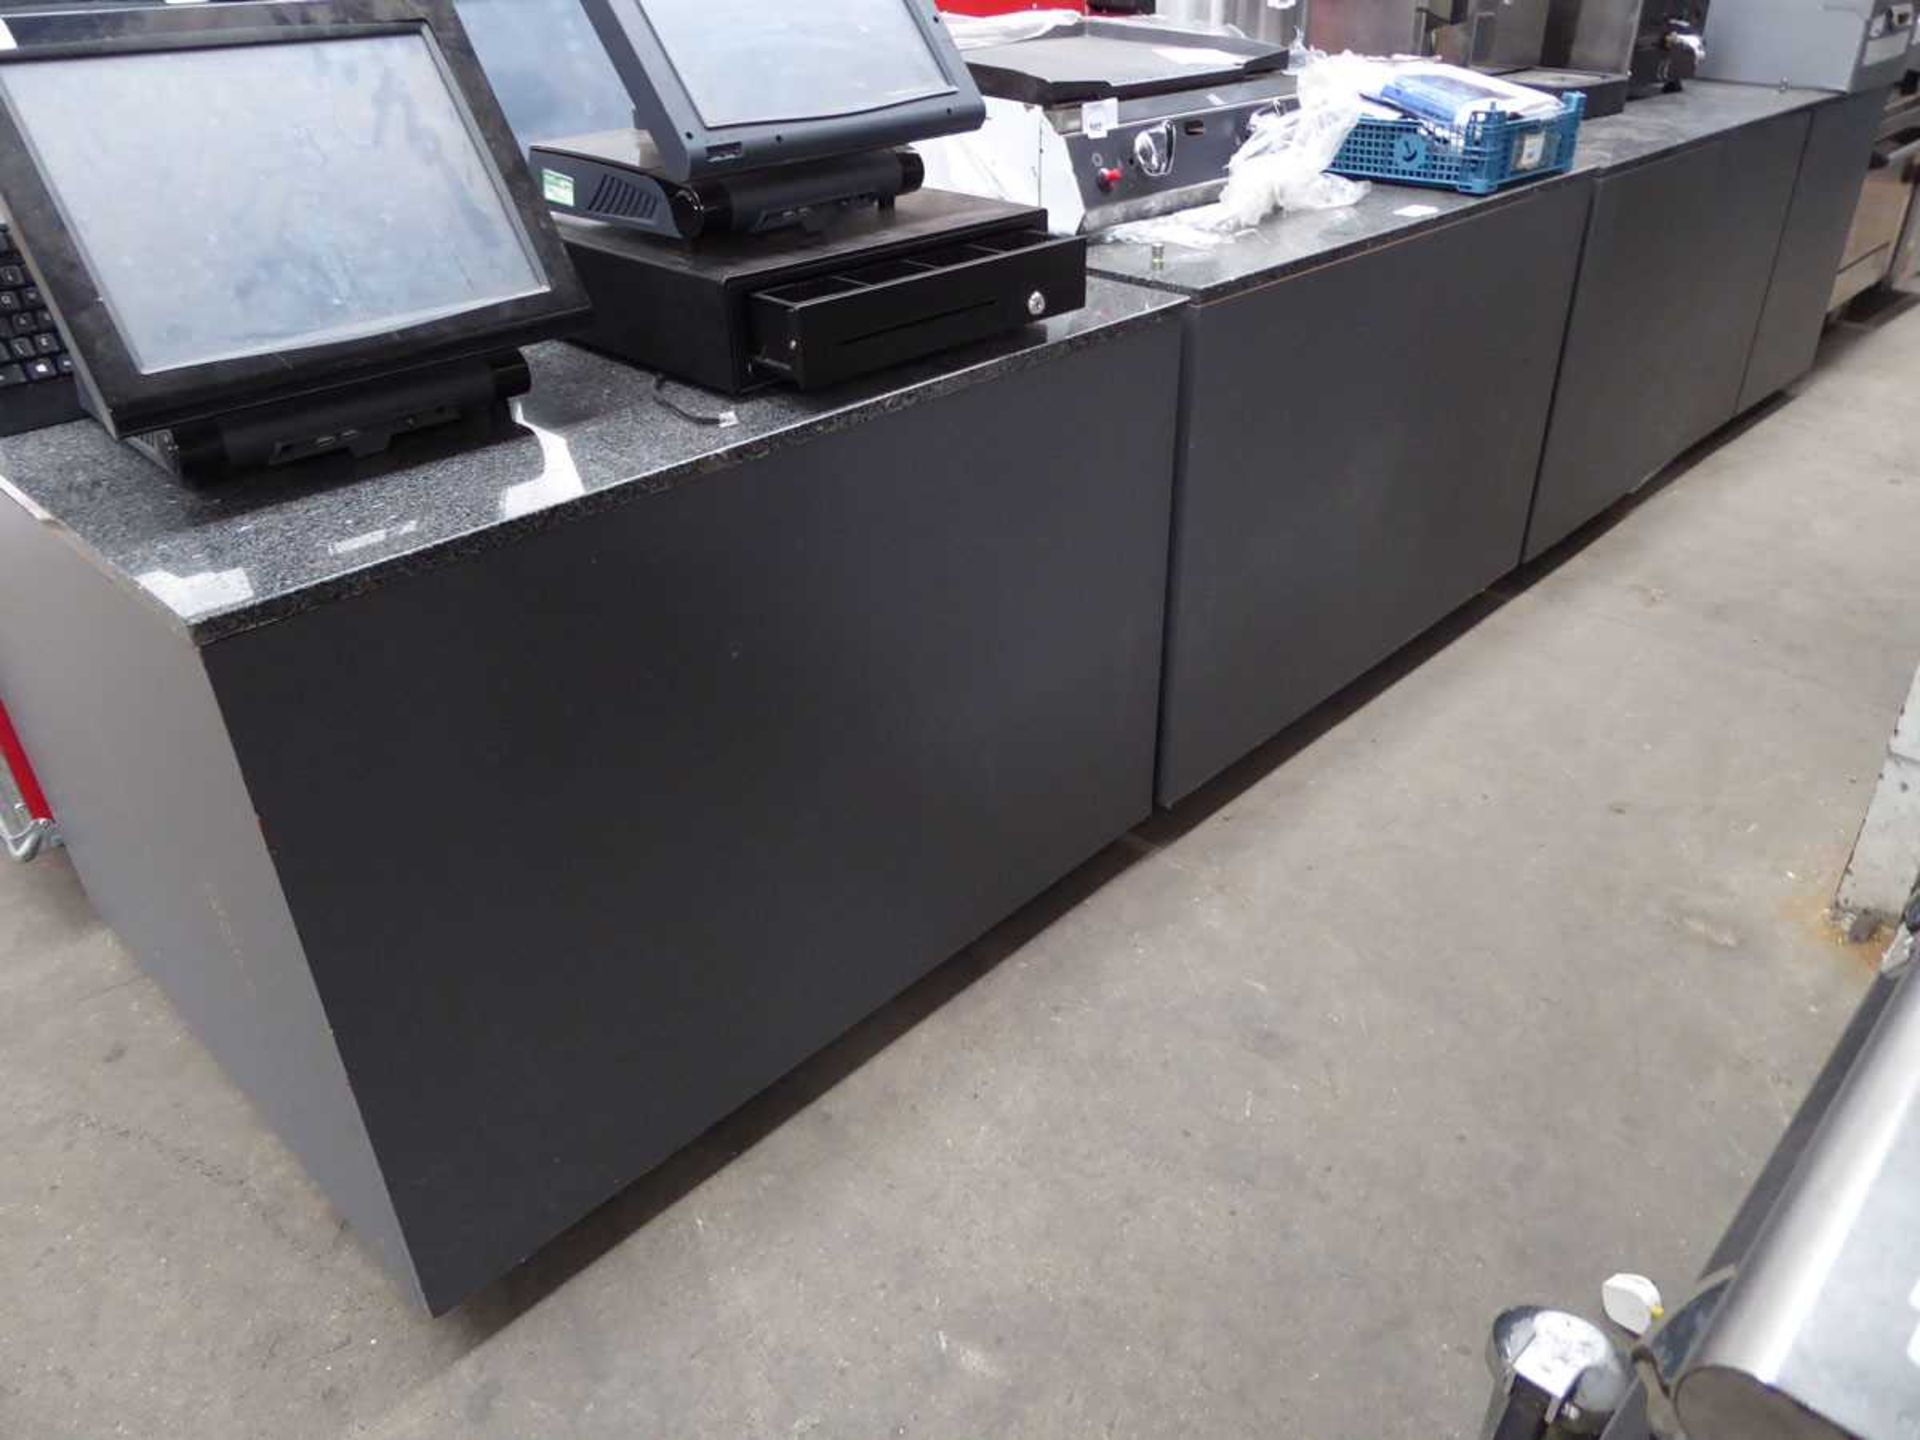 Shop counter with stone slab work surfaces in 5 modular sections, total length of approx 3.5m